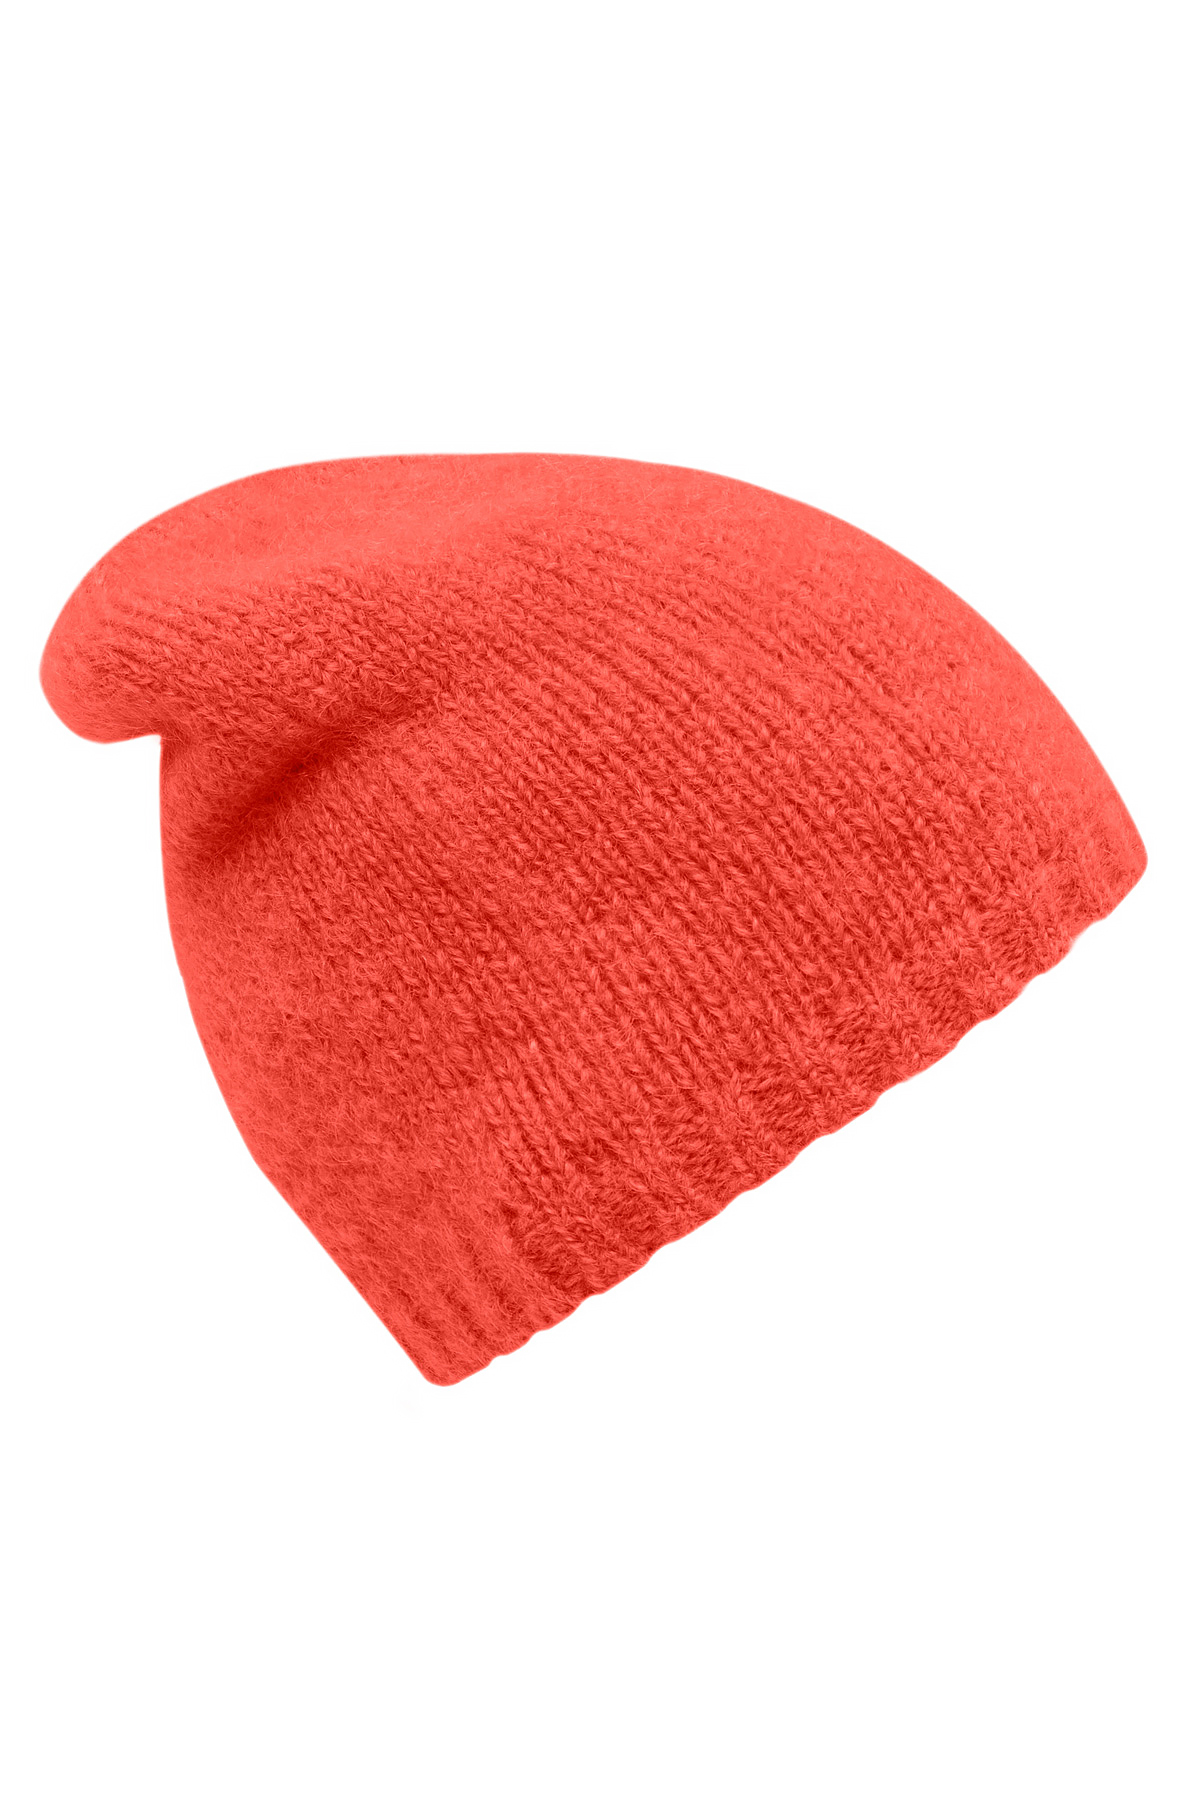 Image of a pink hat